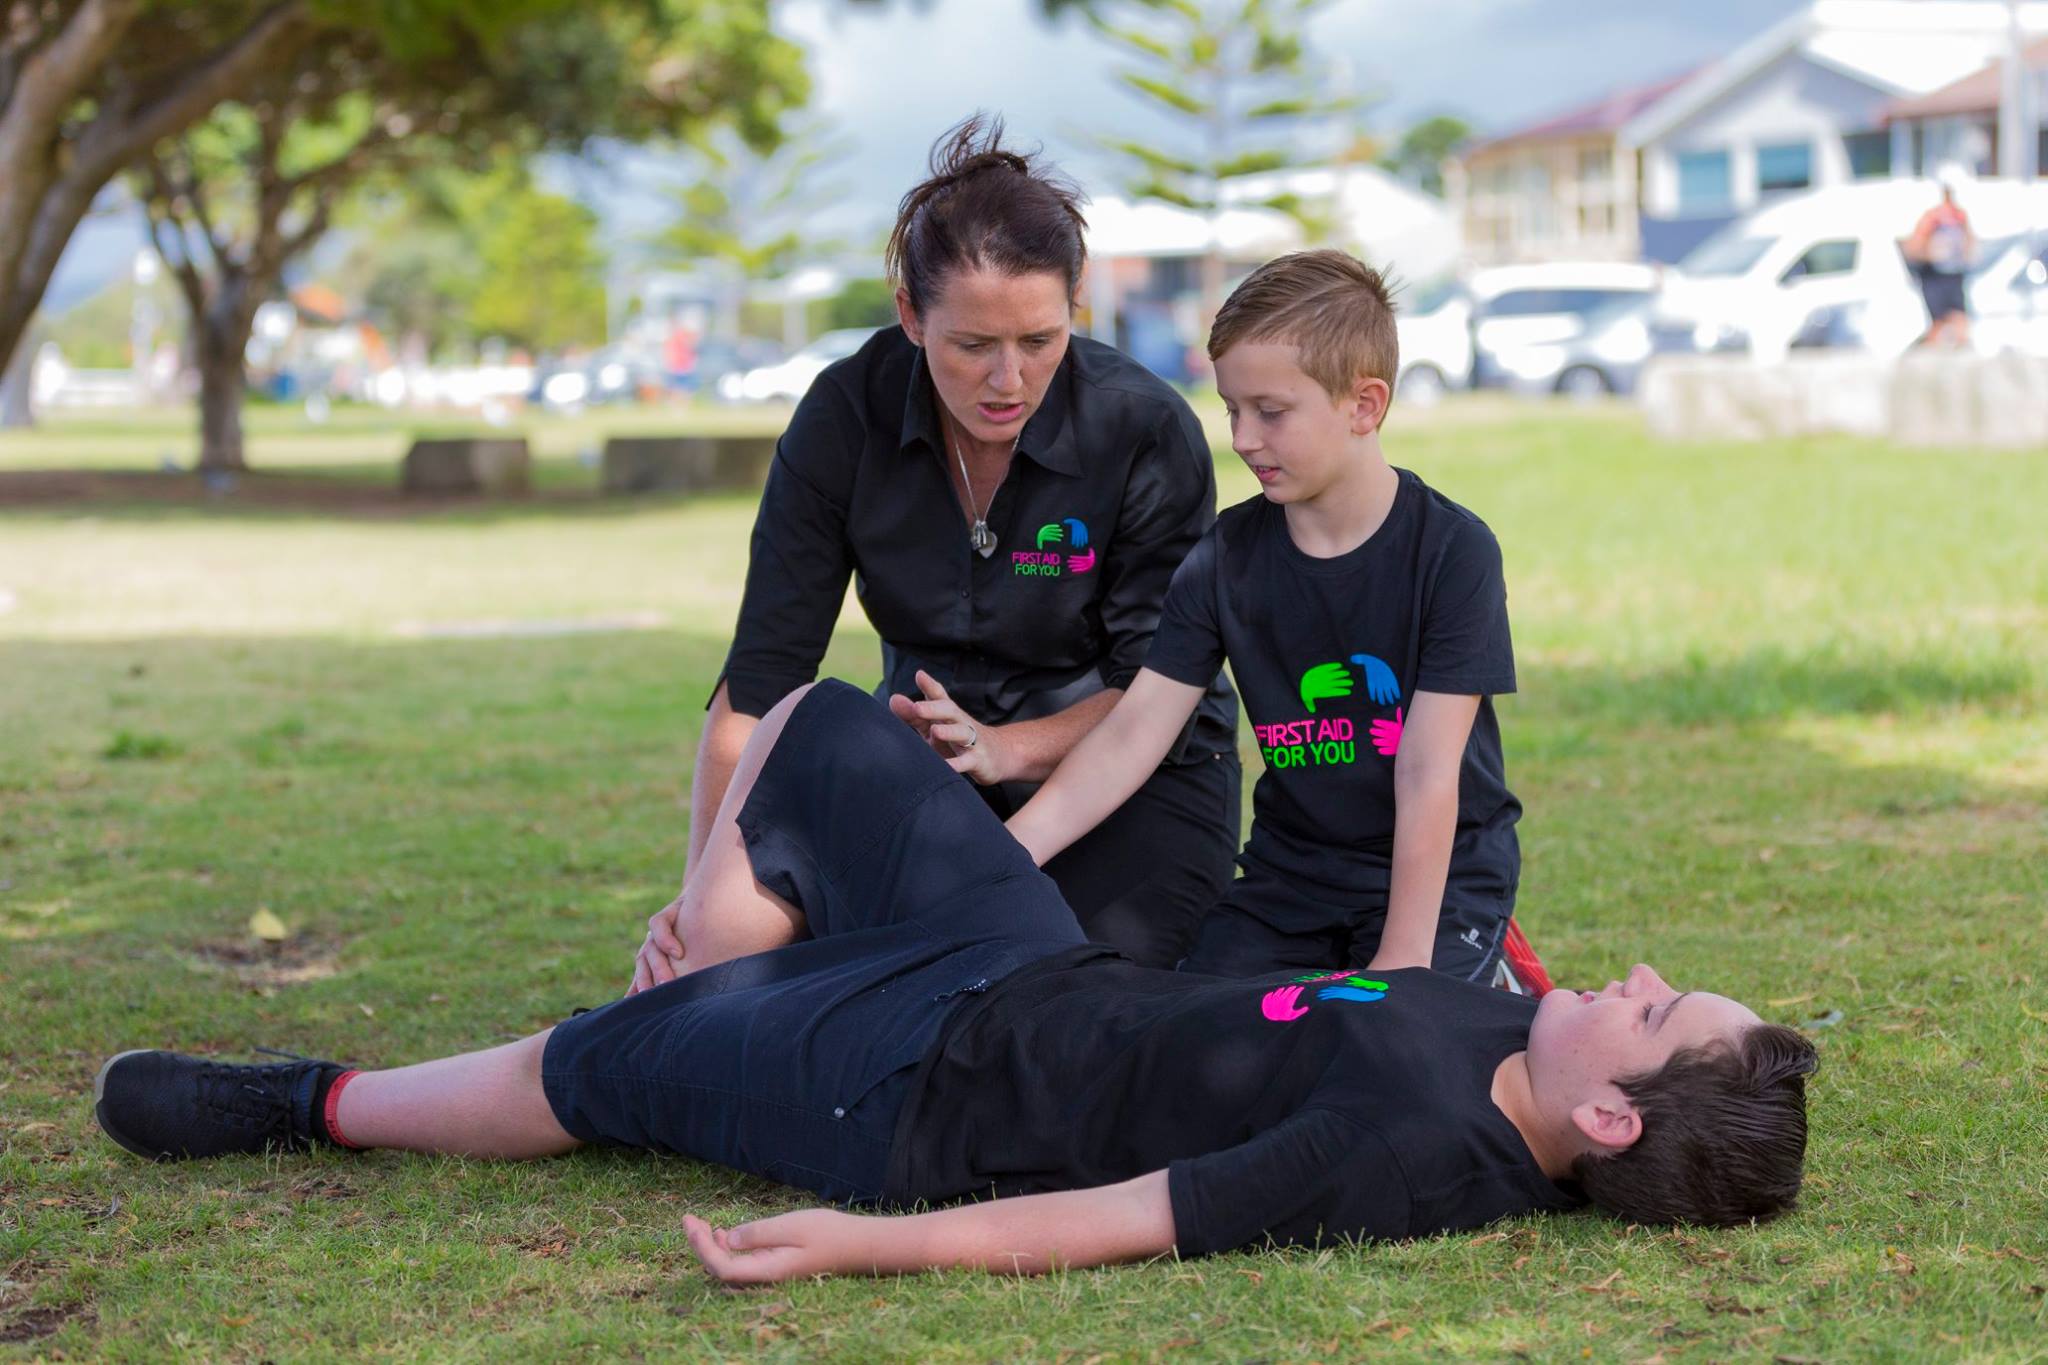 Mary Dawes of First Aid For You teaching the first aid recovery position to 2 boys